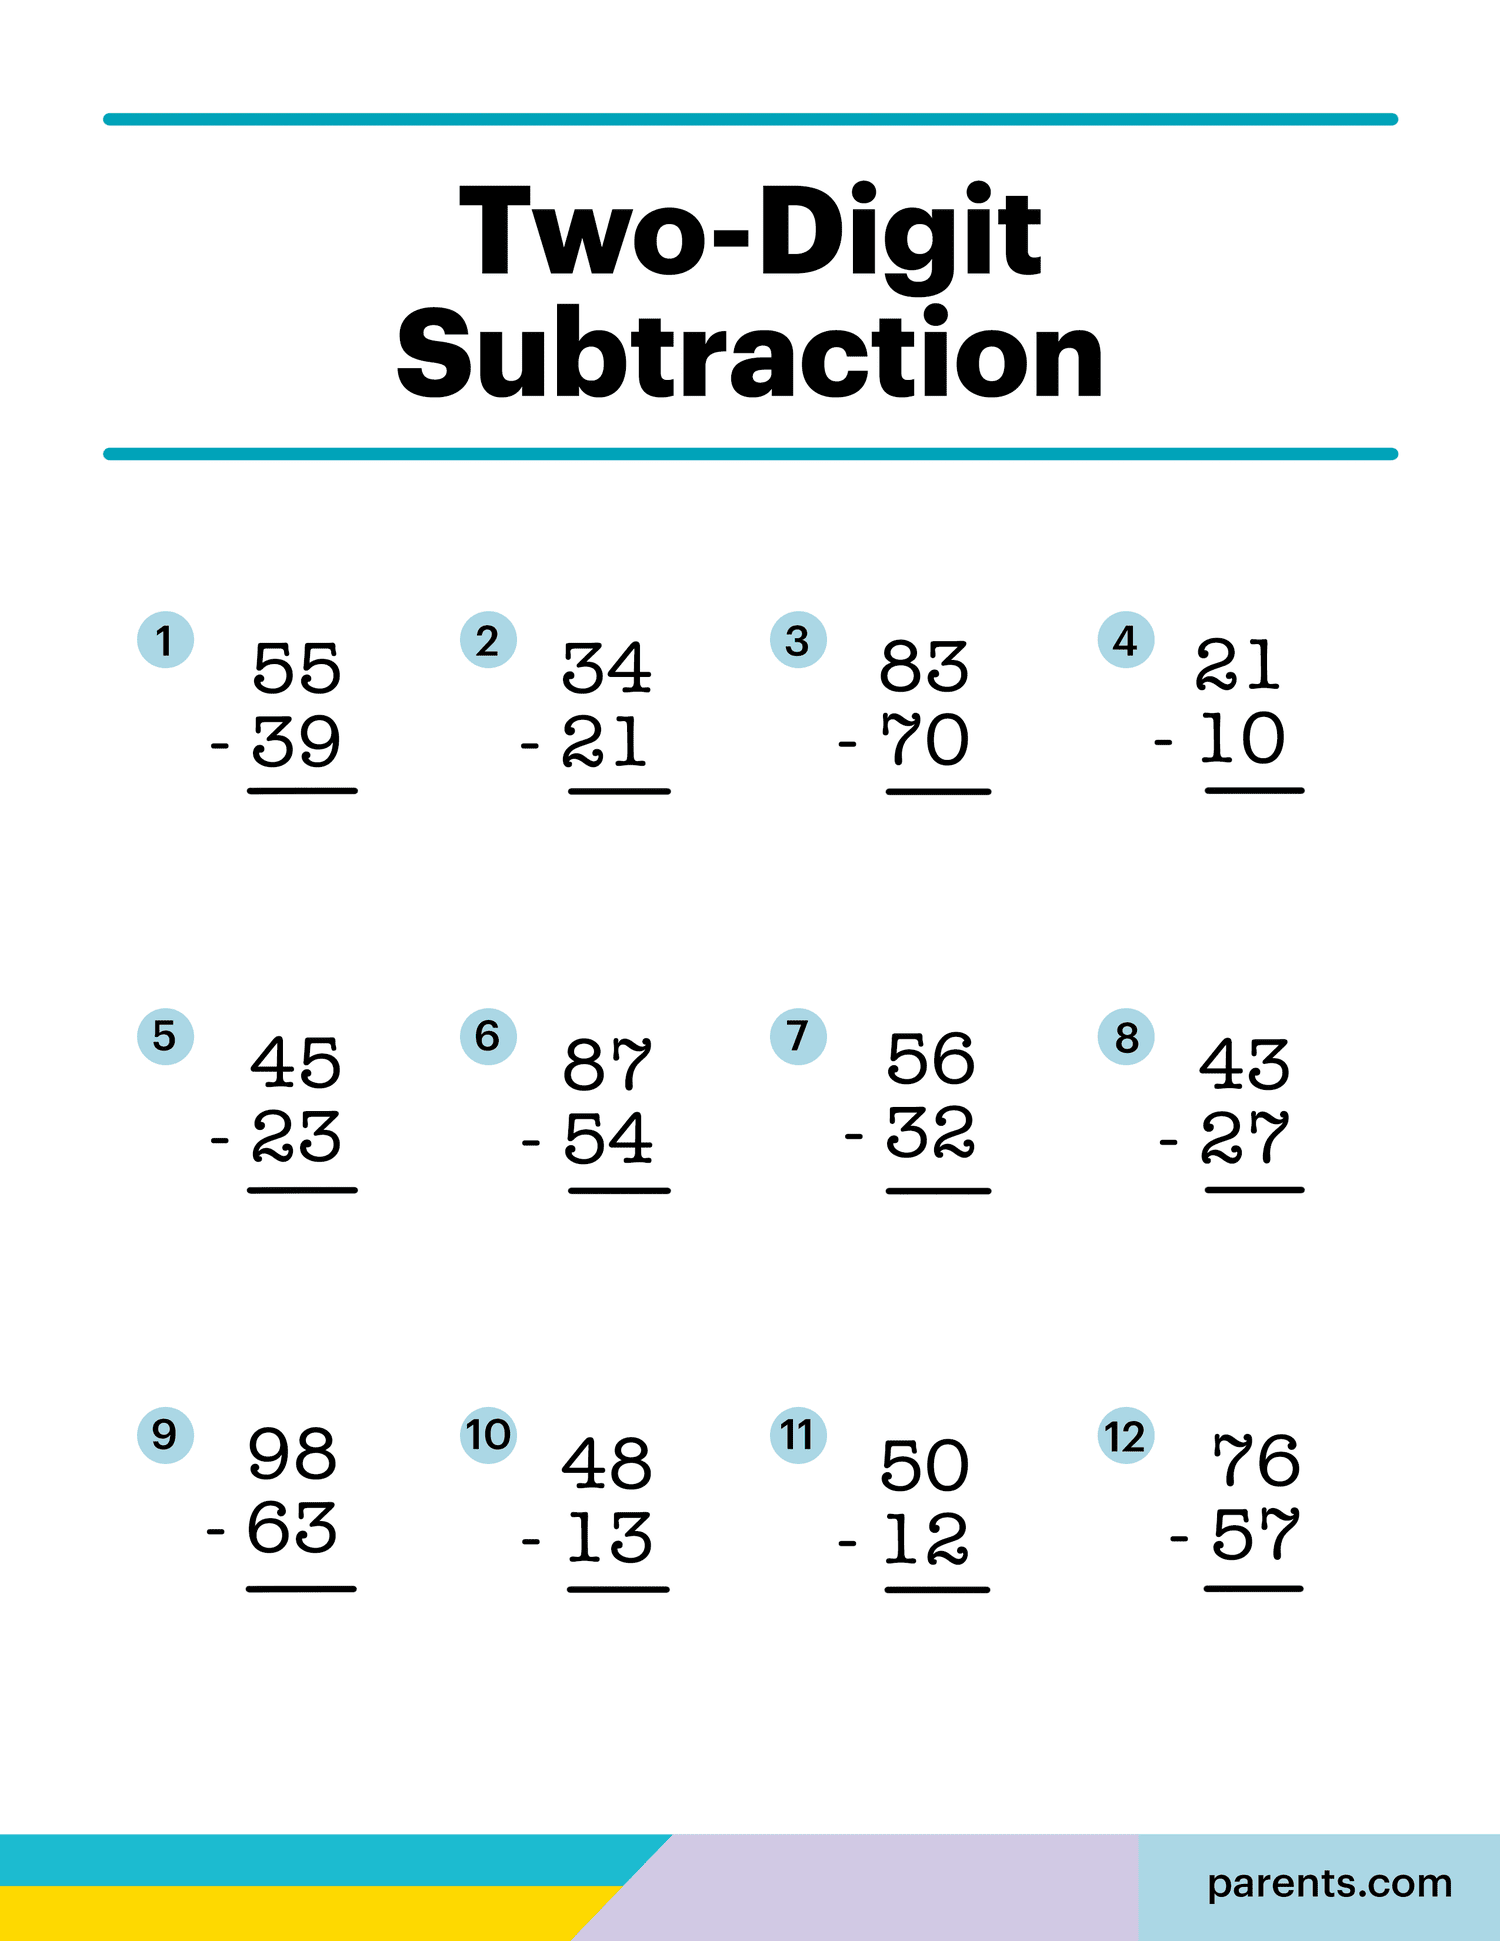 Two-Digit Subtraction With Regrouping